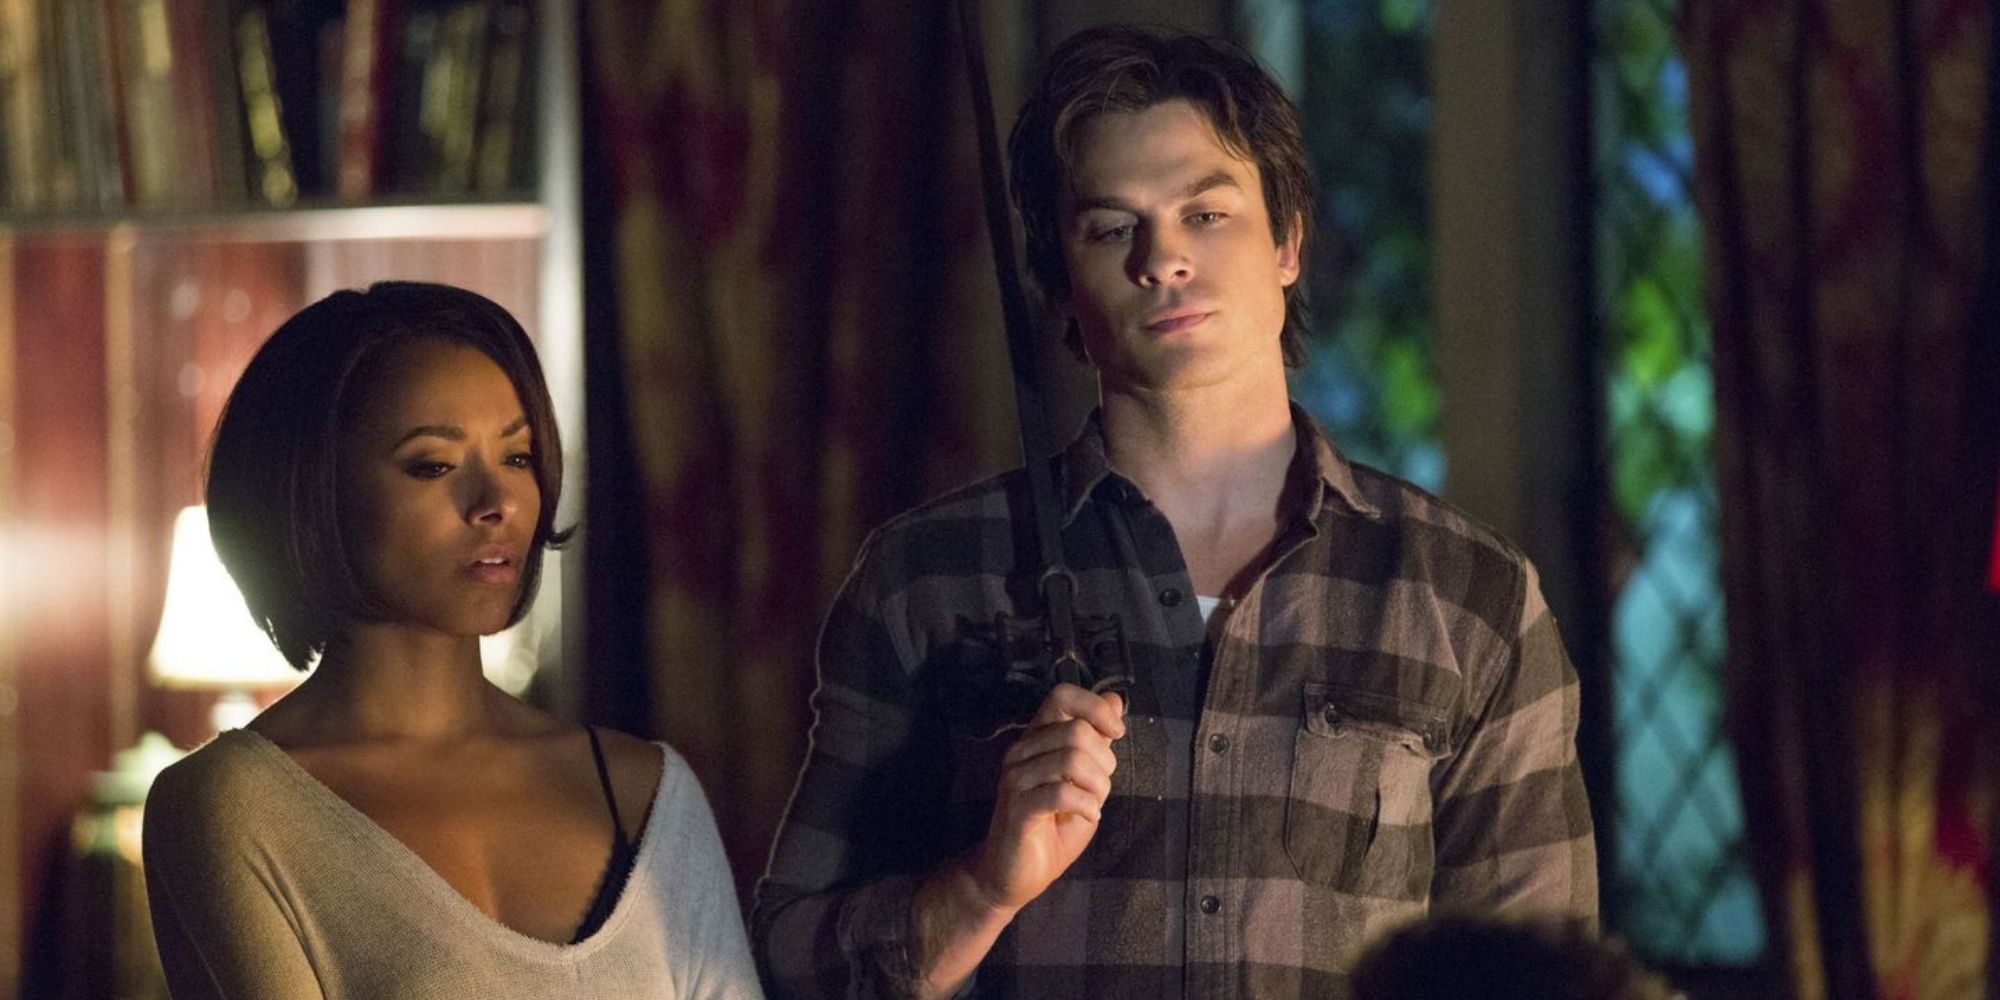 Bonnie and Damon from The Vampire Diaries standing together